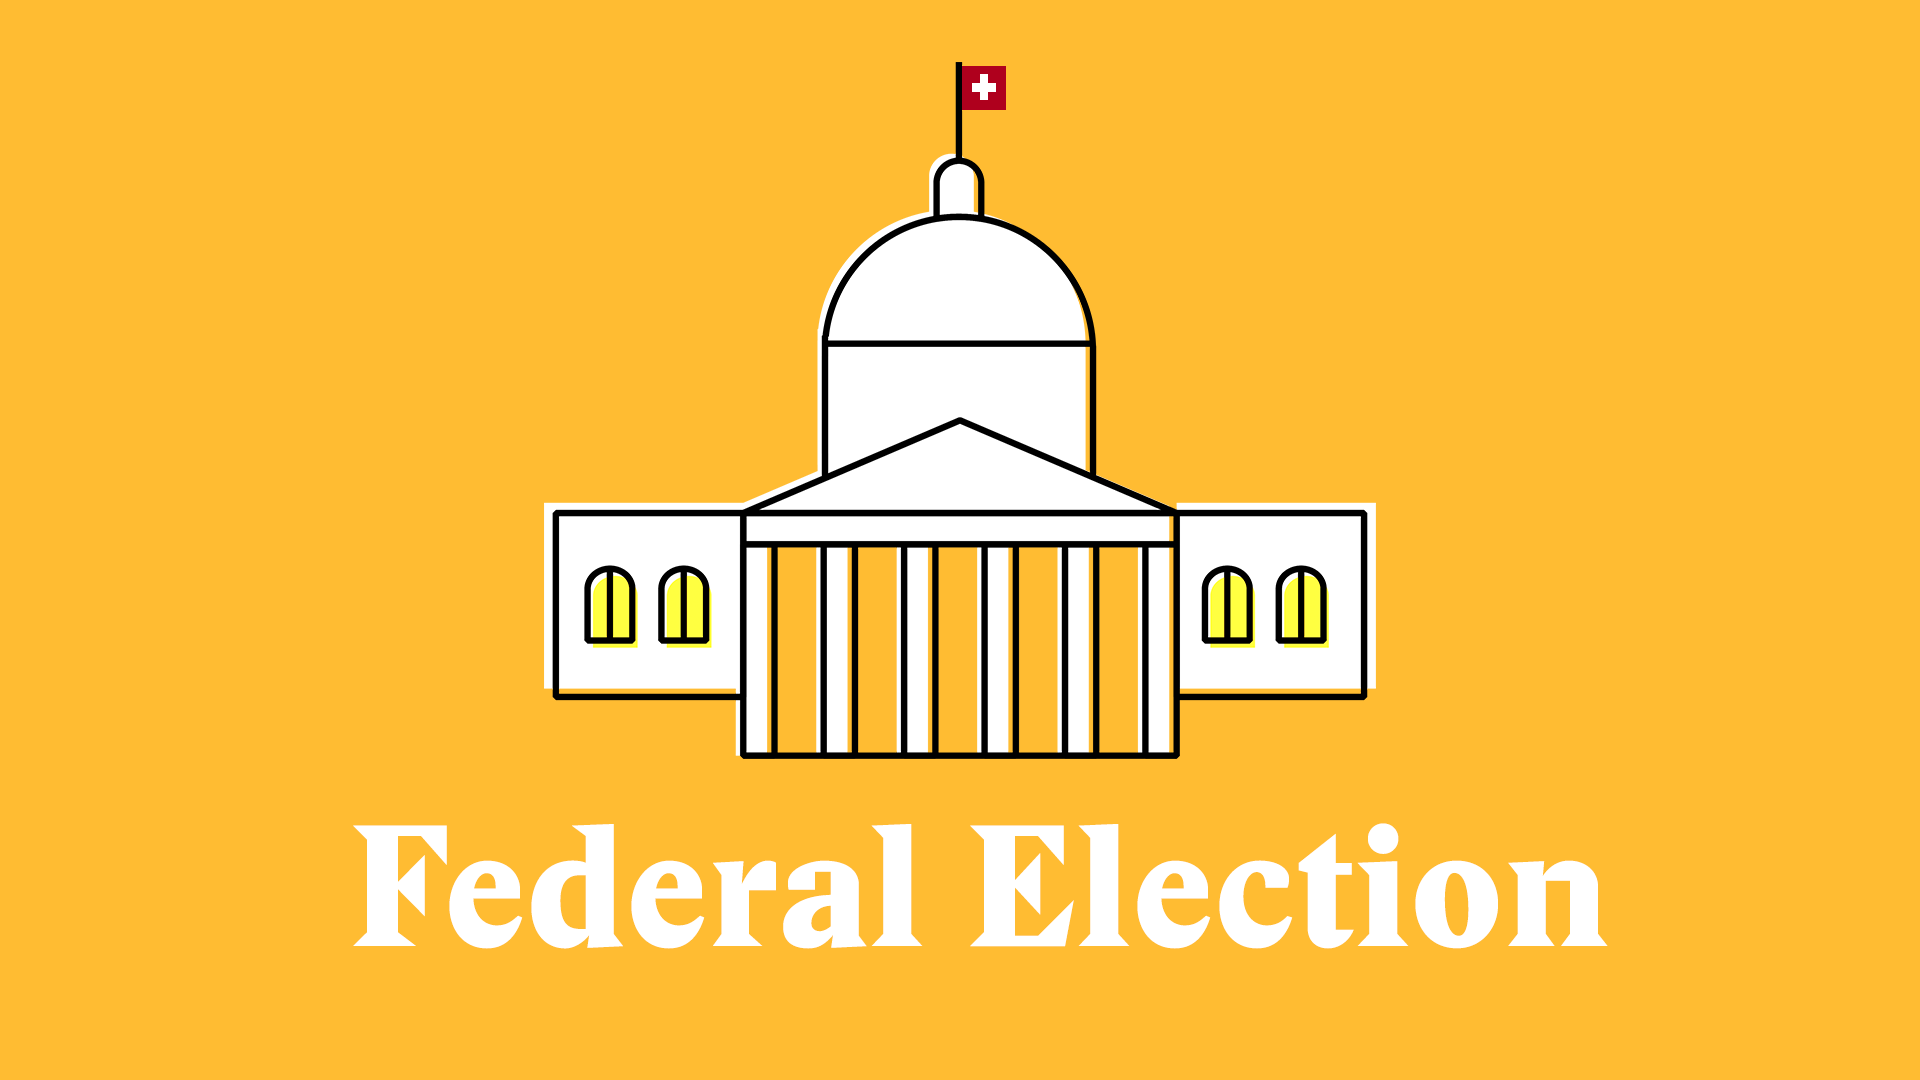 federal elections